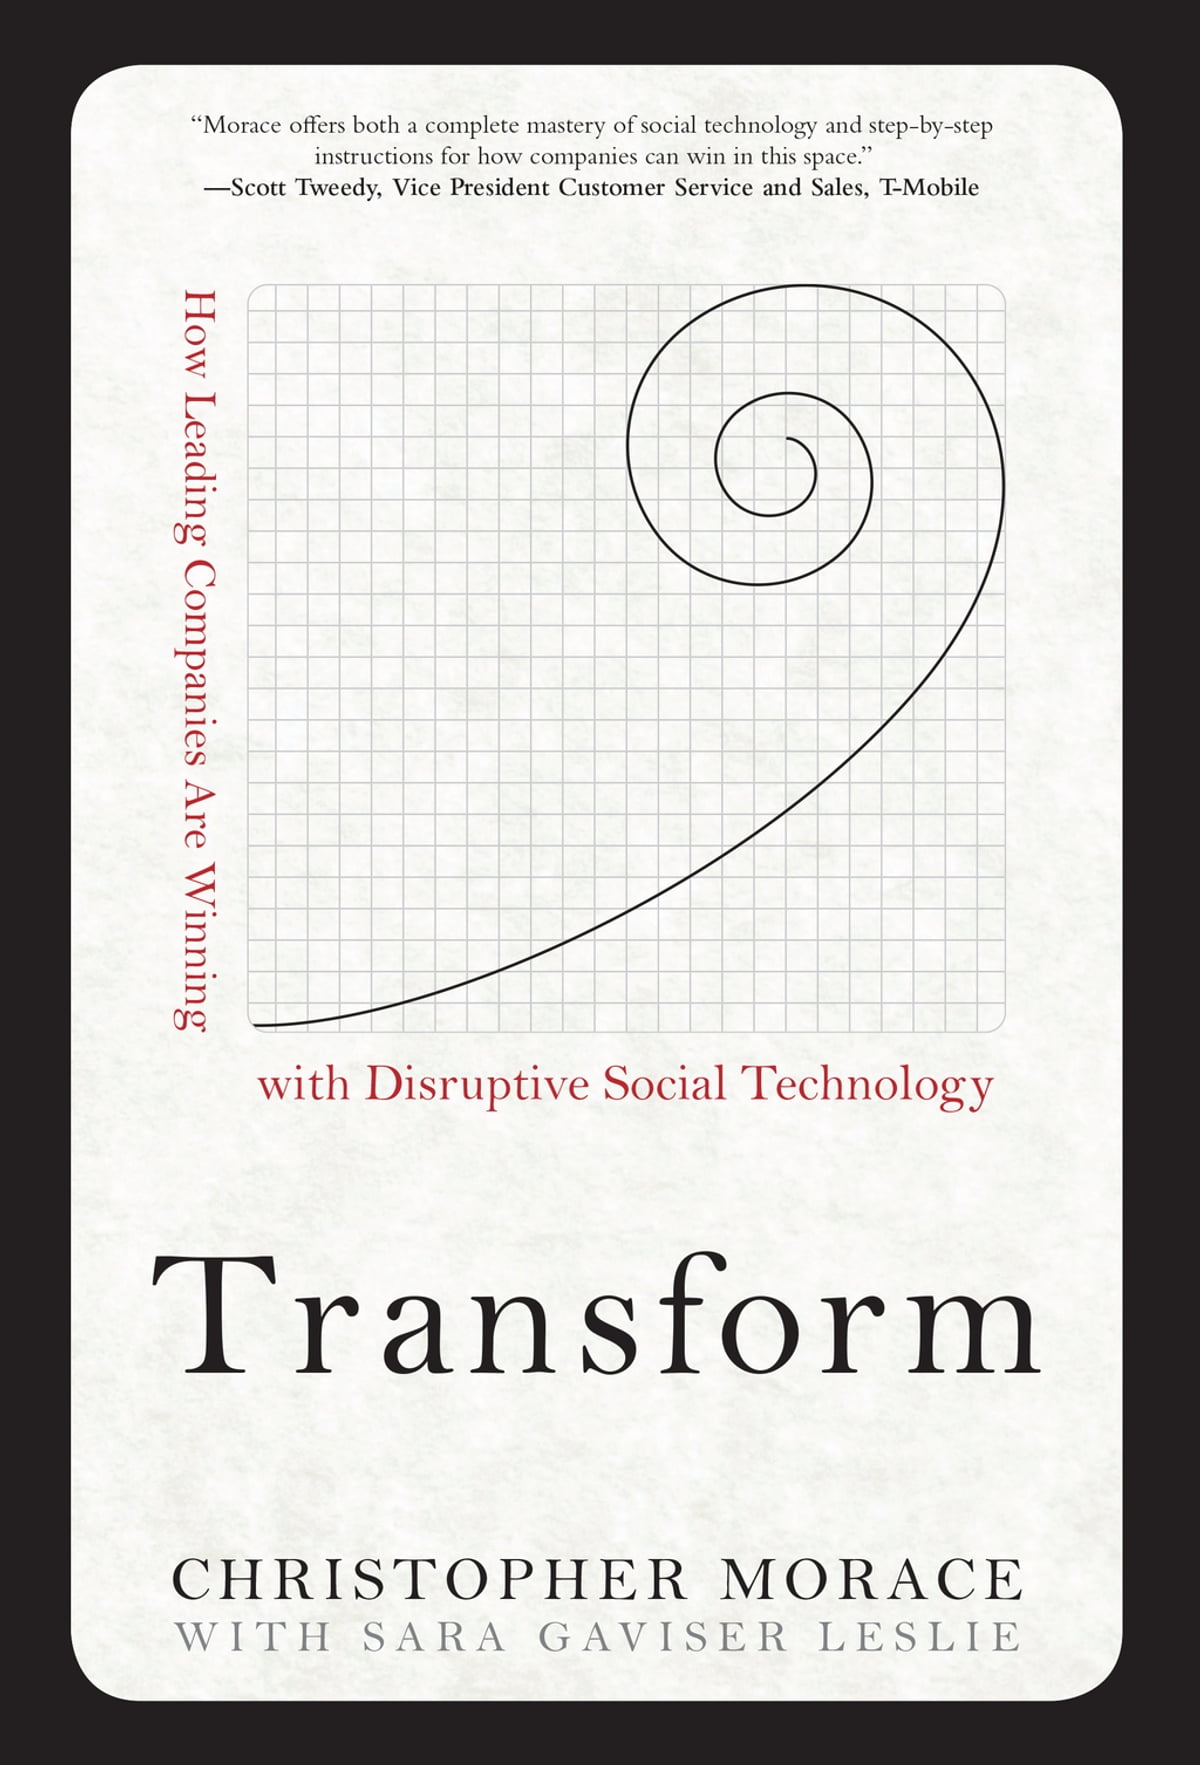 Transform: How Leading Companies are Winning with Disruptive Technology